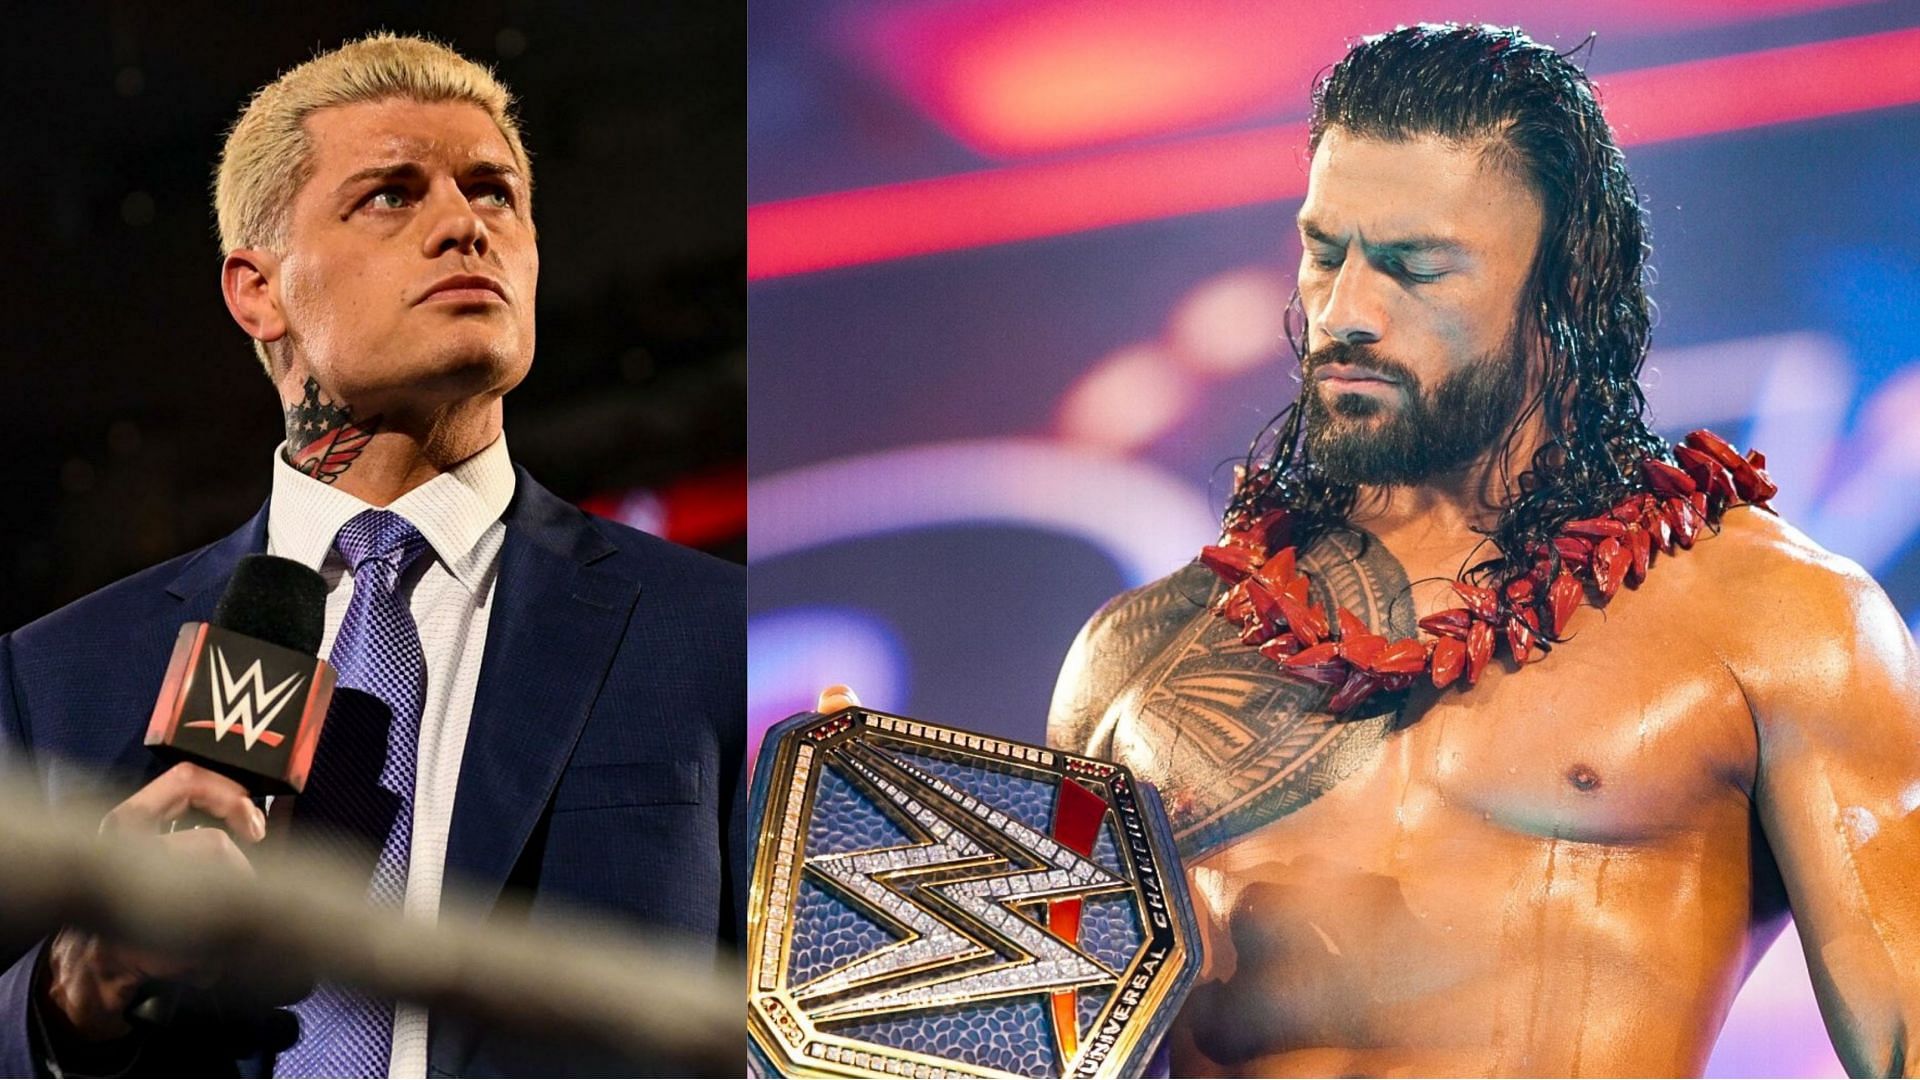 Cody Rhodes (left) and Roman Reigns (right)